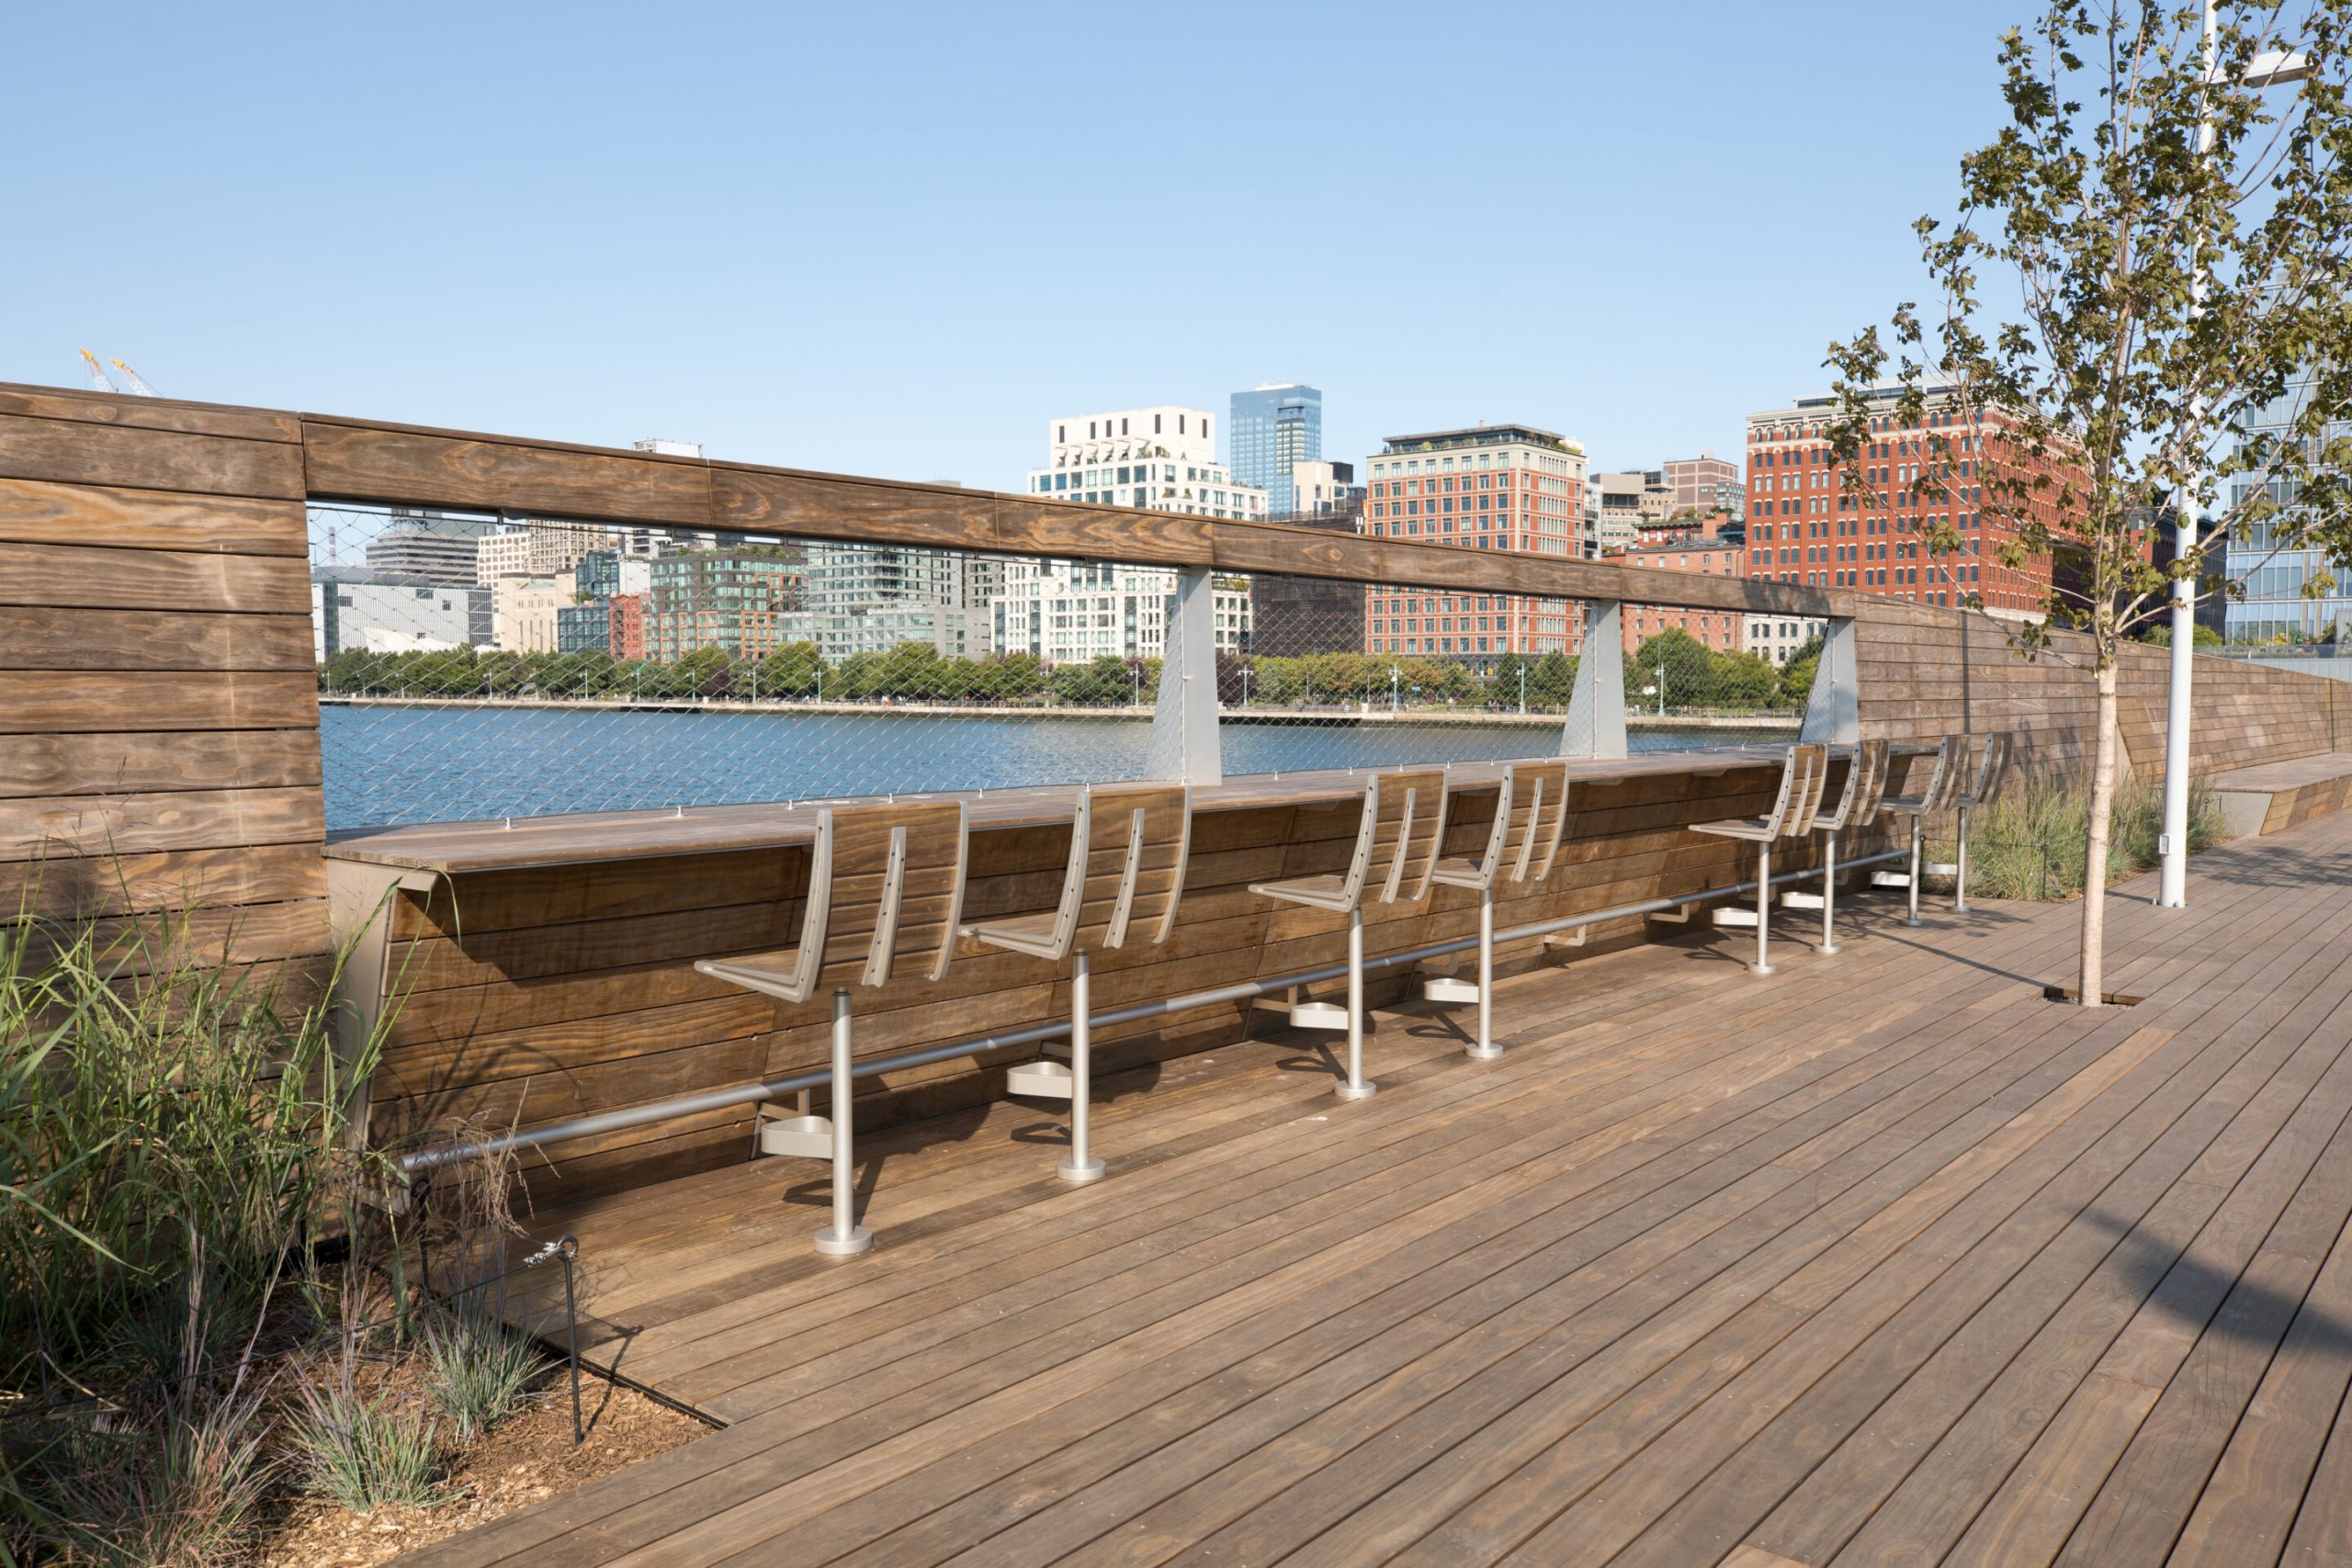 Three sets of two barstools with a half bar top over-looking the Hudson River at Pier 26 during the day at Hudson River Park in New York City New York features kebony modified wood Clear Boardwalk Decking.